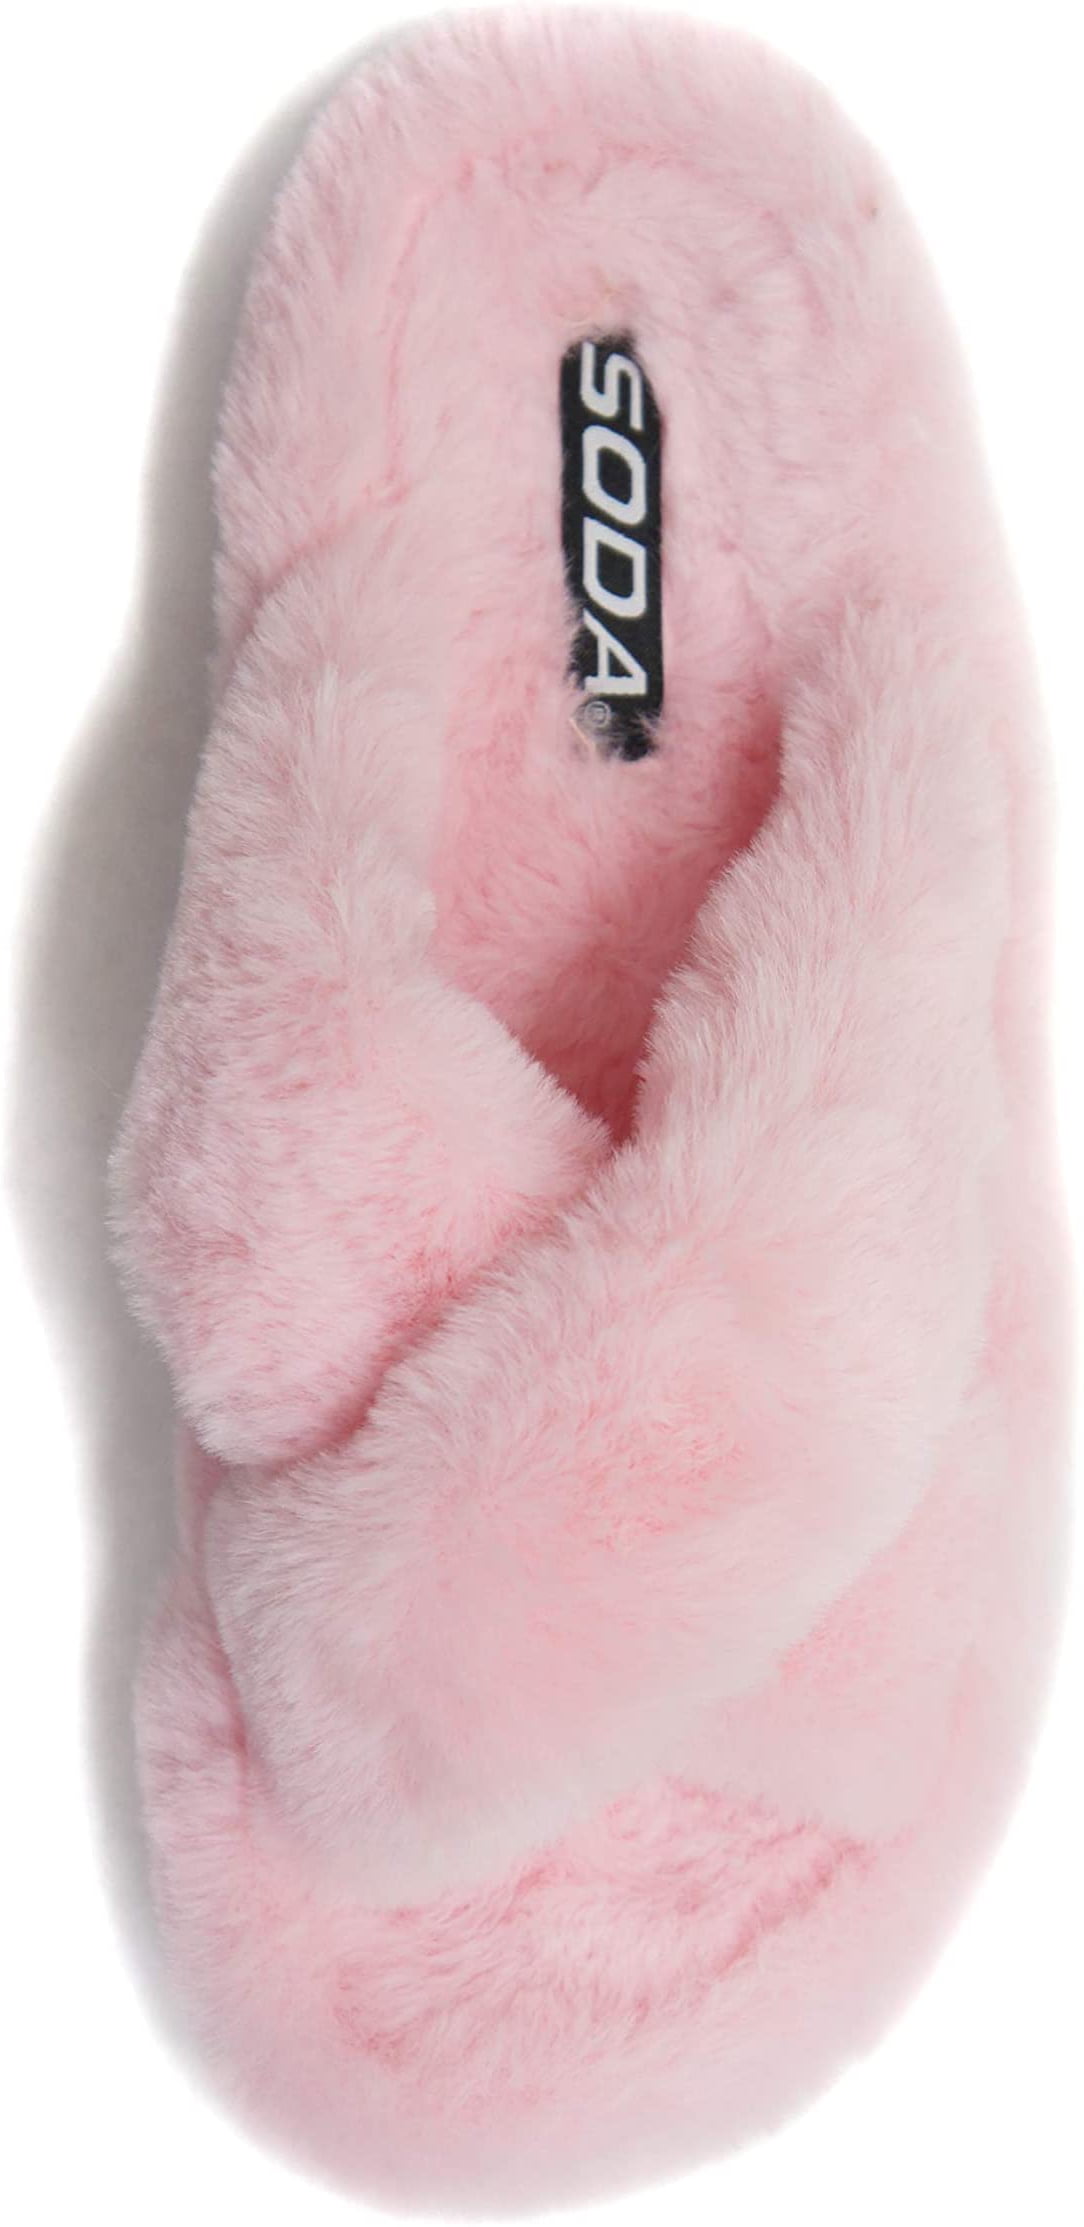 Details about   Soda Women Slip on Soft Fur Fuzzy Fluffy Sandals Slide Slippers Cheetah Engage 